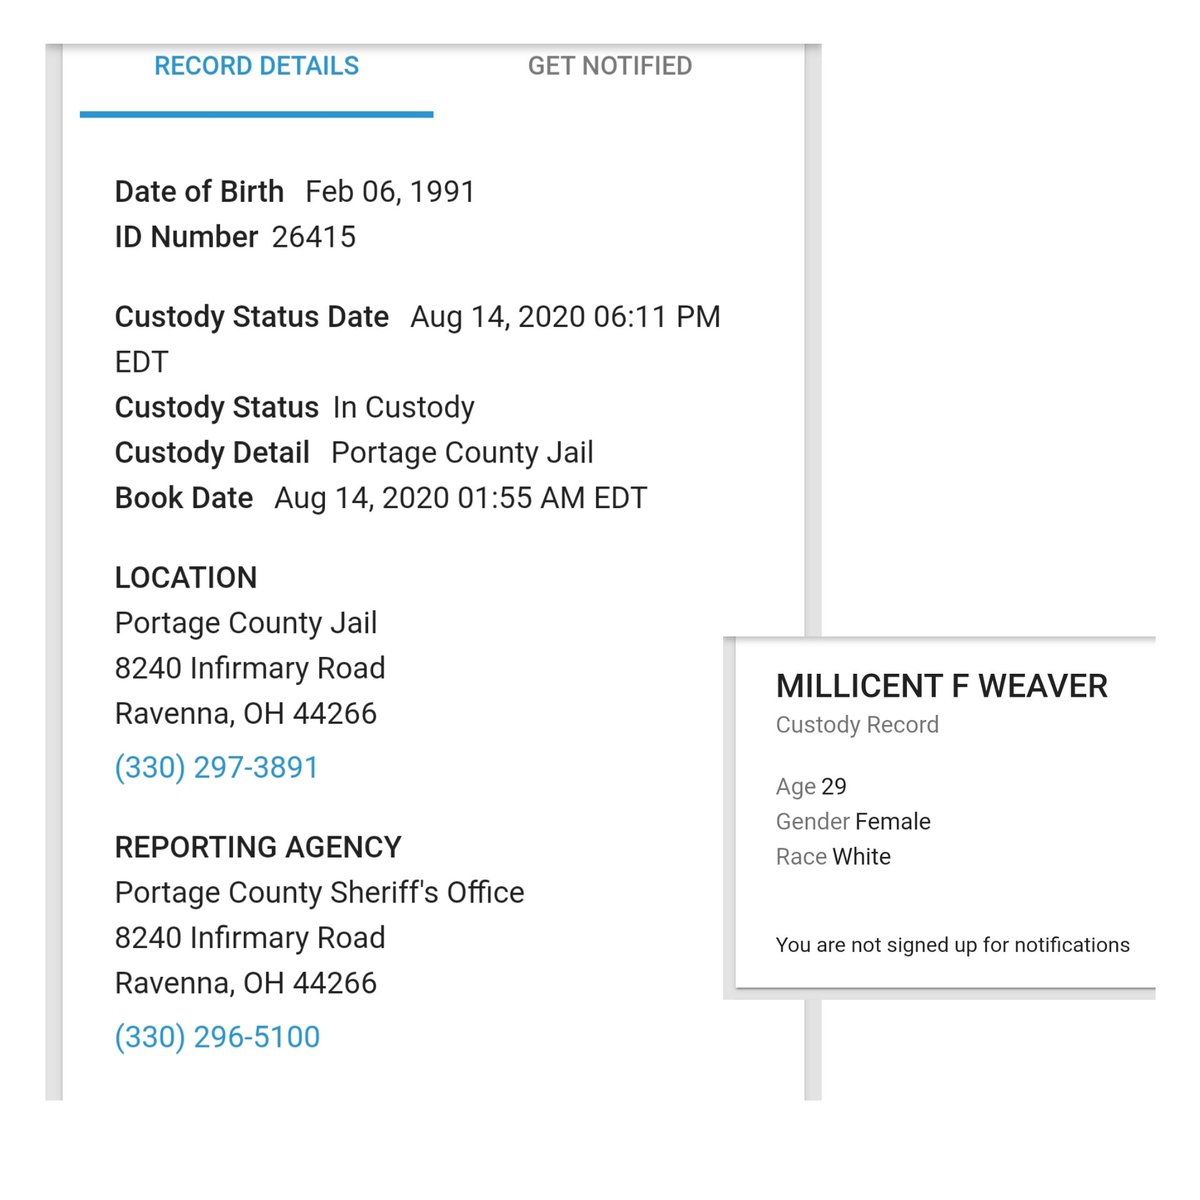  #MillieWeaver's arrest record for August 14, 2020,  #PortageCounty  #Ohio JailSource: ↓↓↓ https://vinelink.vineapps.com/person-detail/offender/11815757;tabIndexToSelect=0